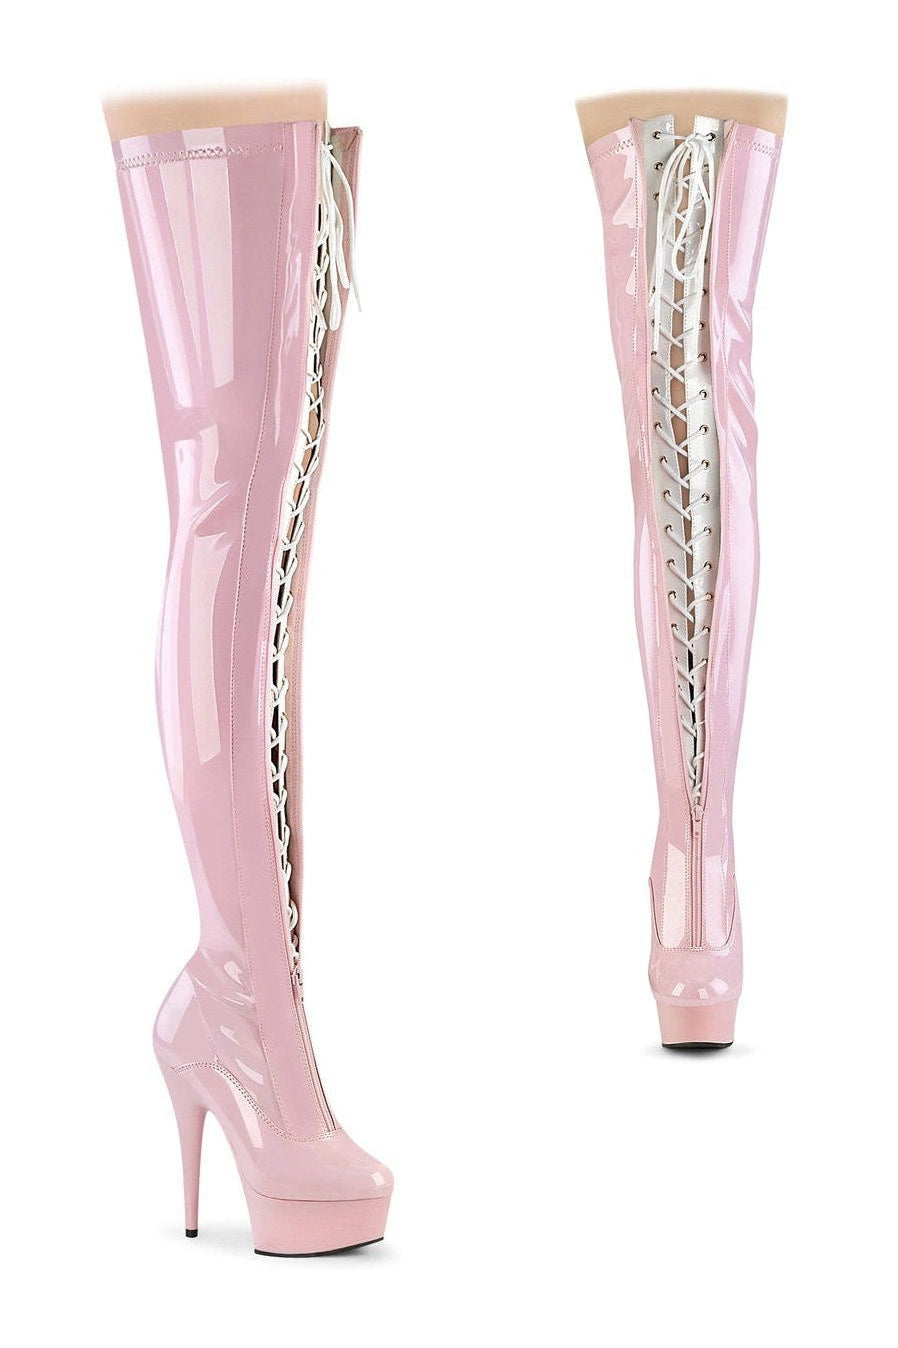 DELIGHT-3027 Thigh Boot | Pink Patent-Thigh Boots-Pleaser-Pink-12-Patent-SEXYSHOES.COM